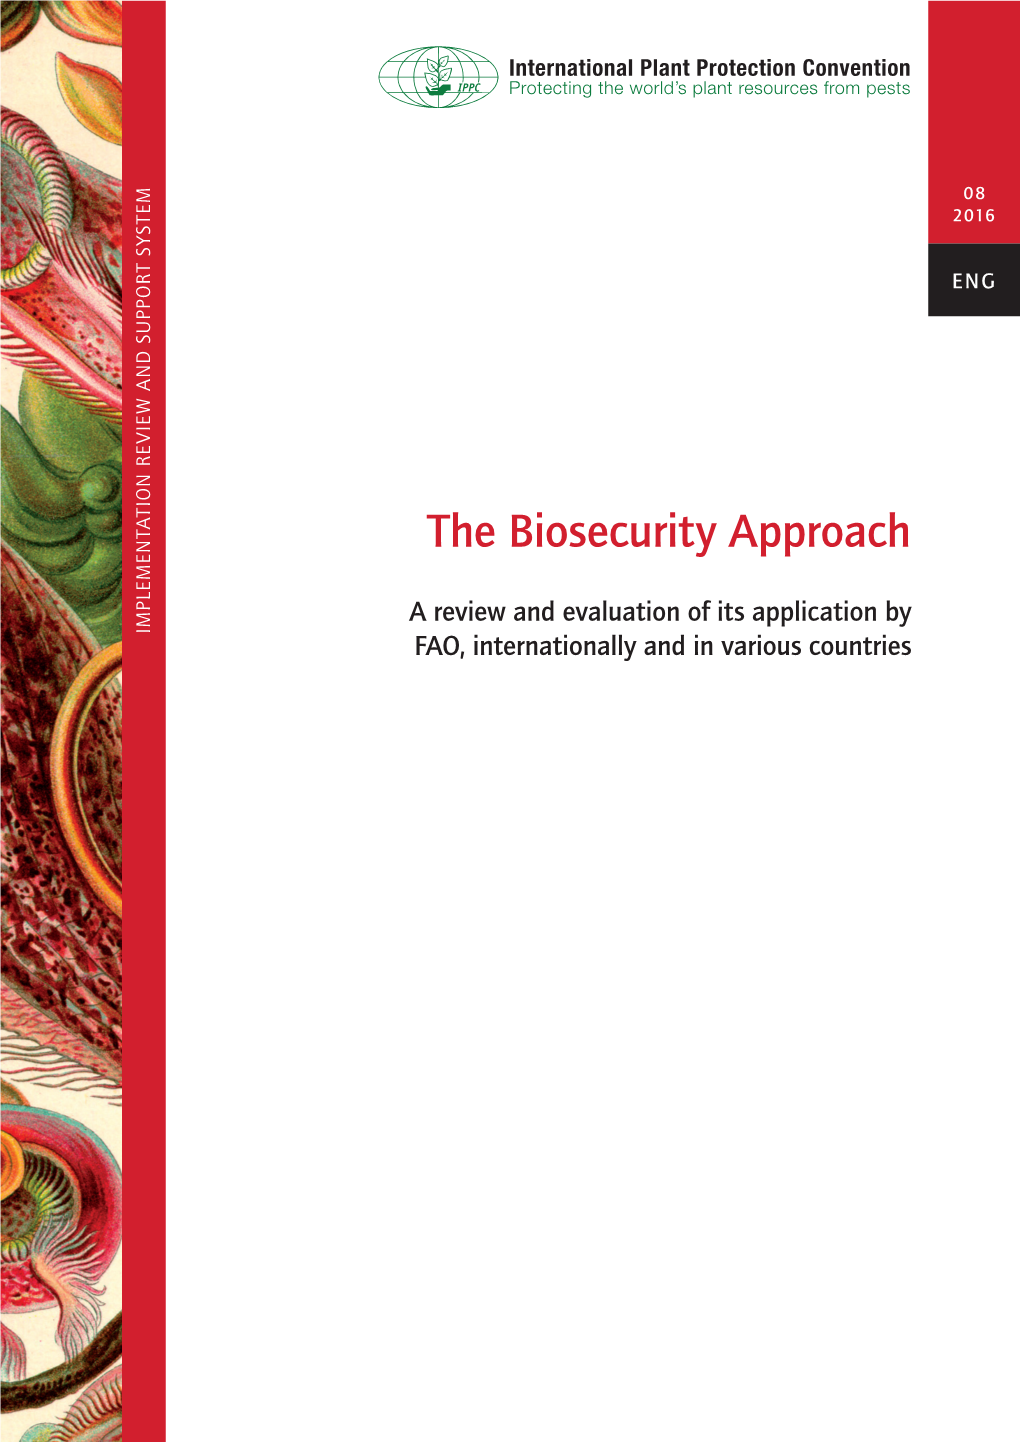 The Biosecurity Approach